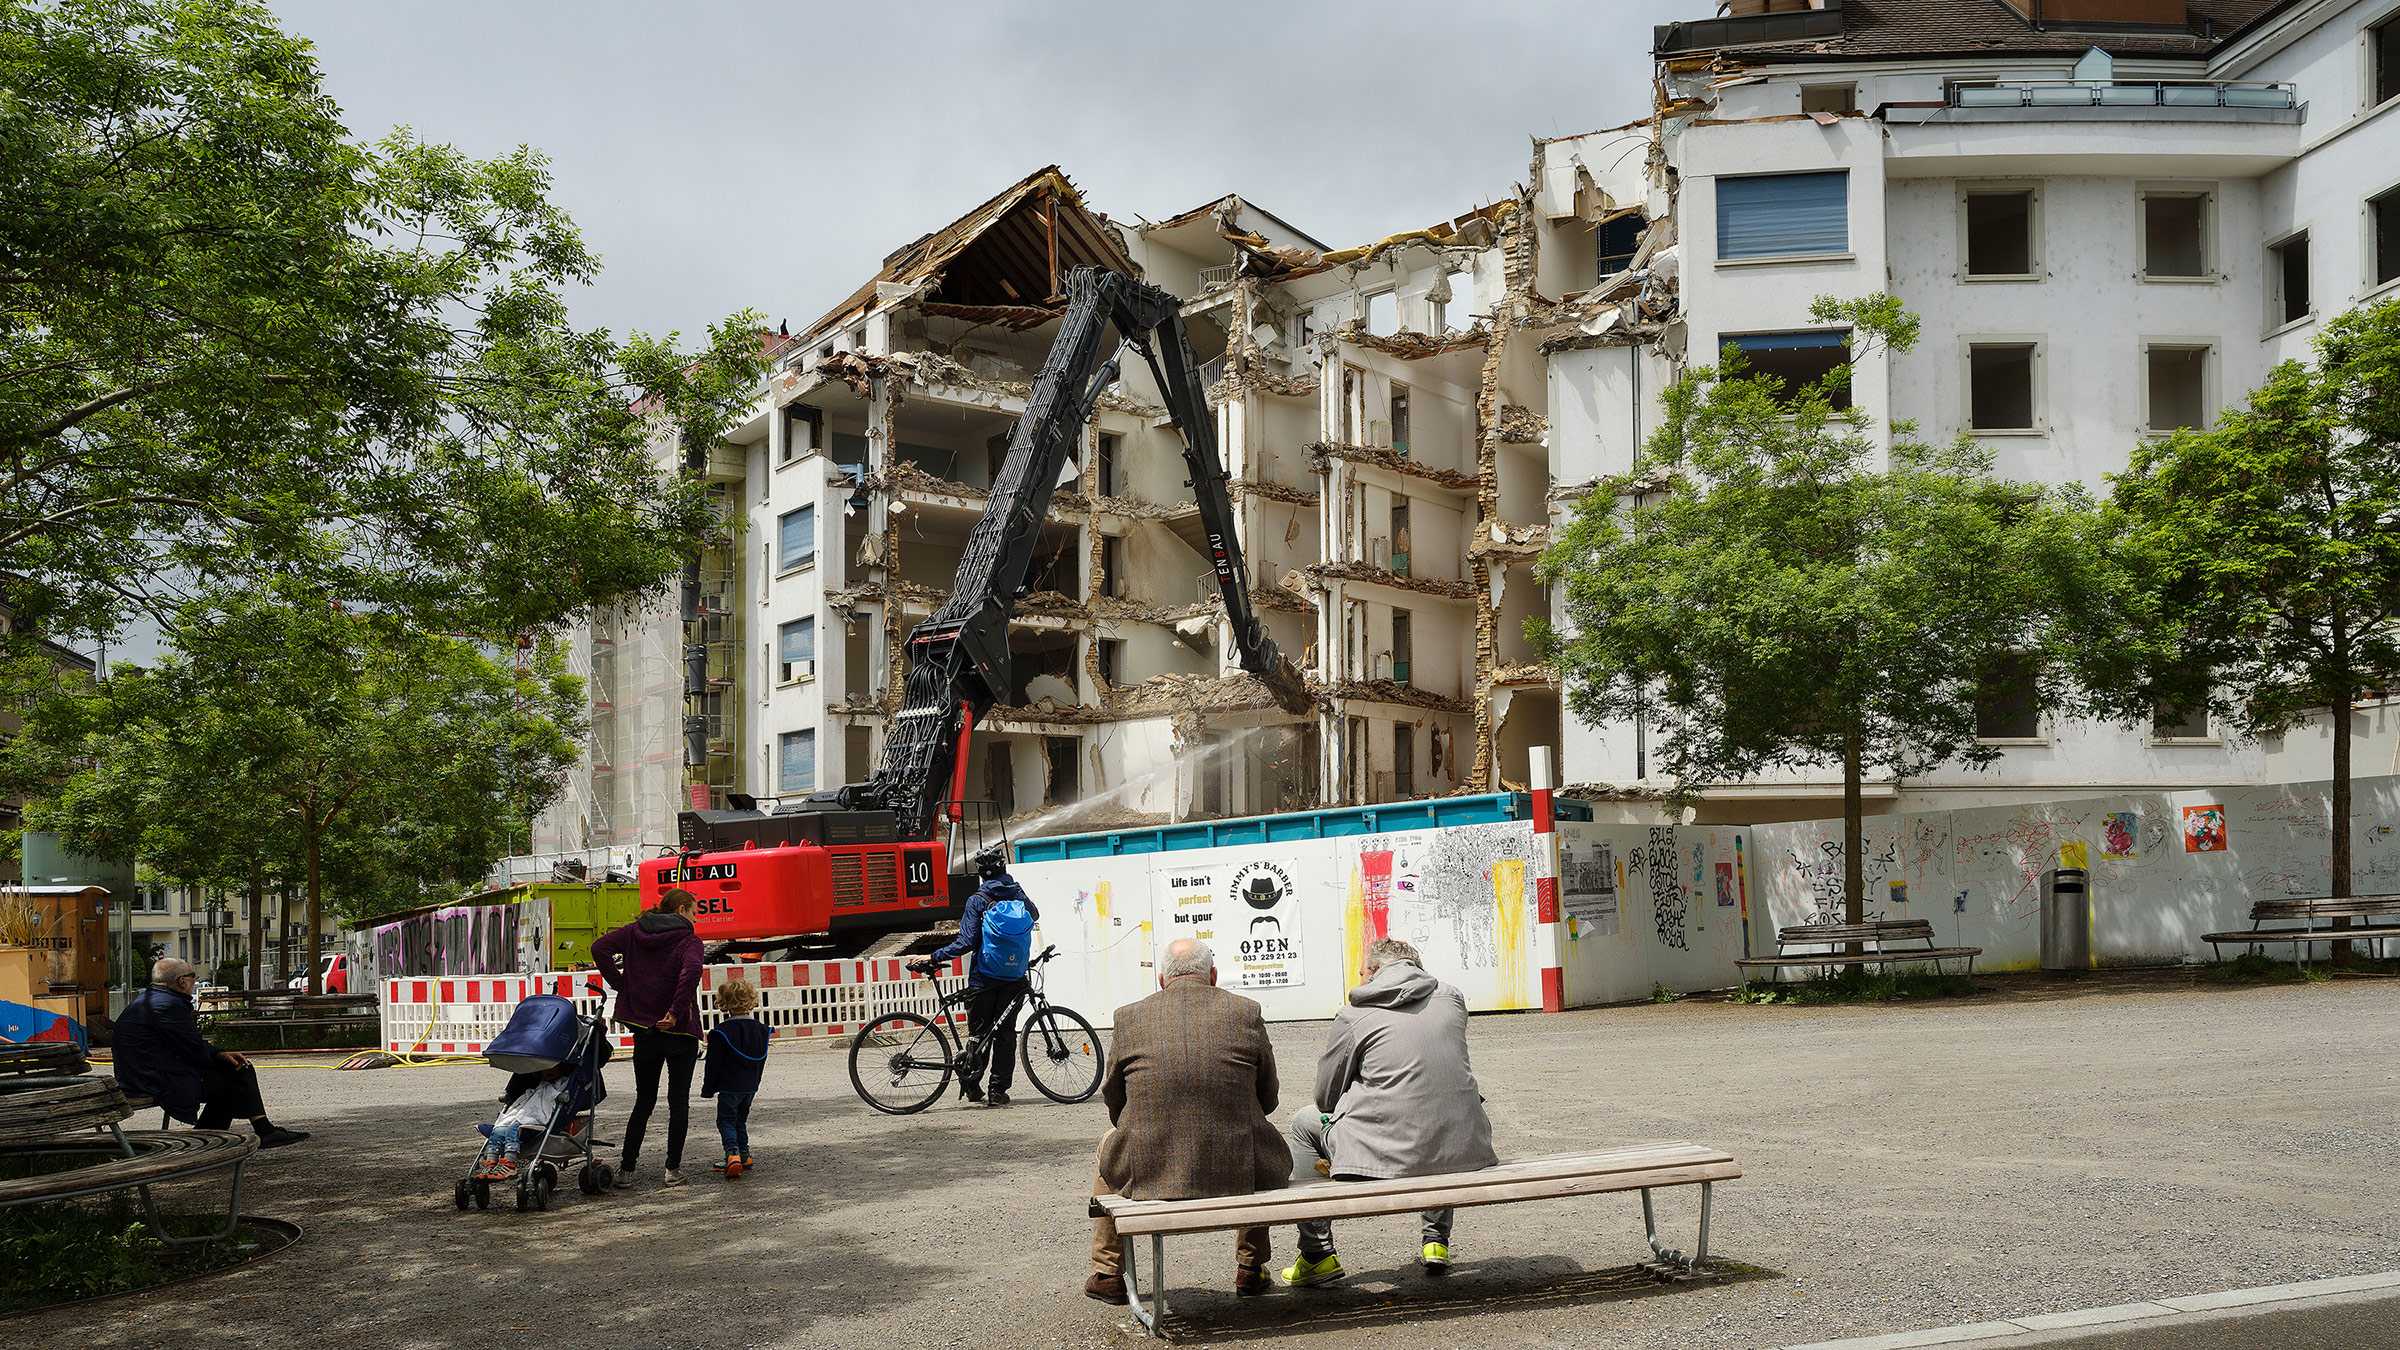 Two old people sit on a bench and watch as the building in front of them is demolished.